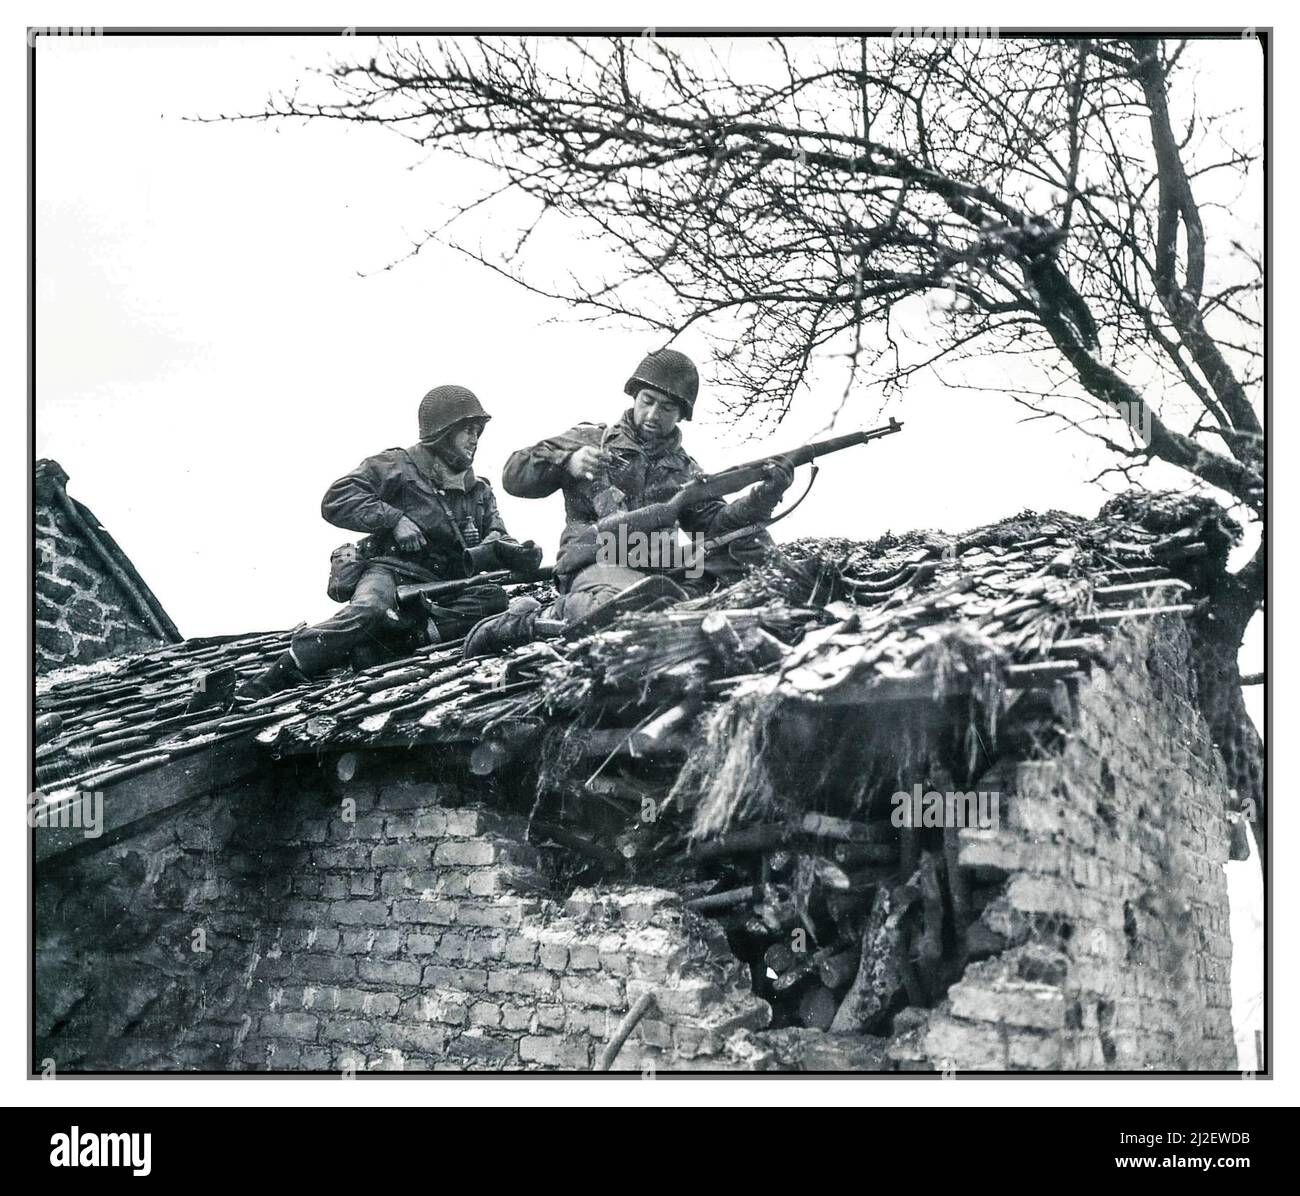 BATTLE OF THE BULGE  S/Sgt. Urban Minicozzi and Pfc. Andy Masiero stop to reload while sniping snipers form the roof of a building in Beffe, Belgium. 1st Battalion, 290th Infantry Regiment, 75th Infantry Division.'  Photographer: Corrado Date 7 January 1945 World War II Second World War Stock Photo